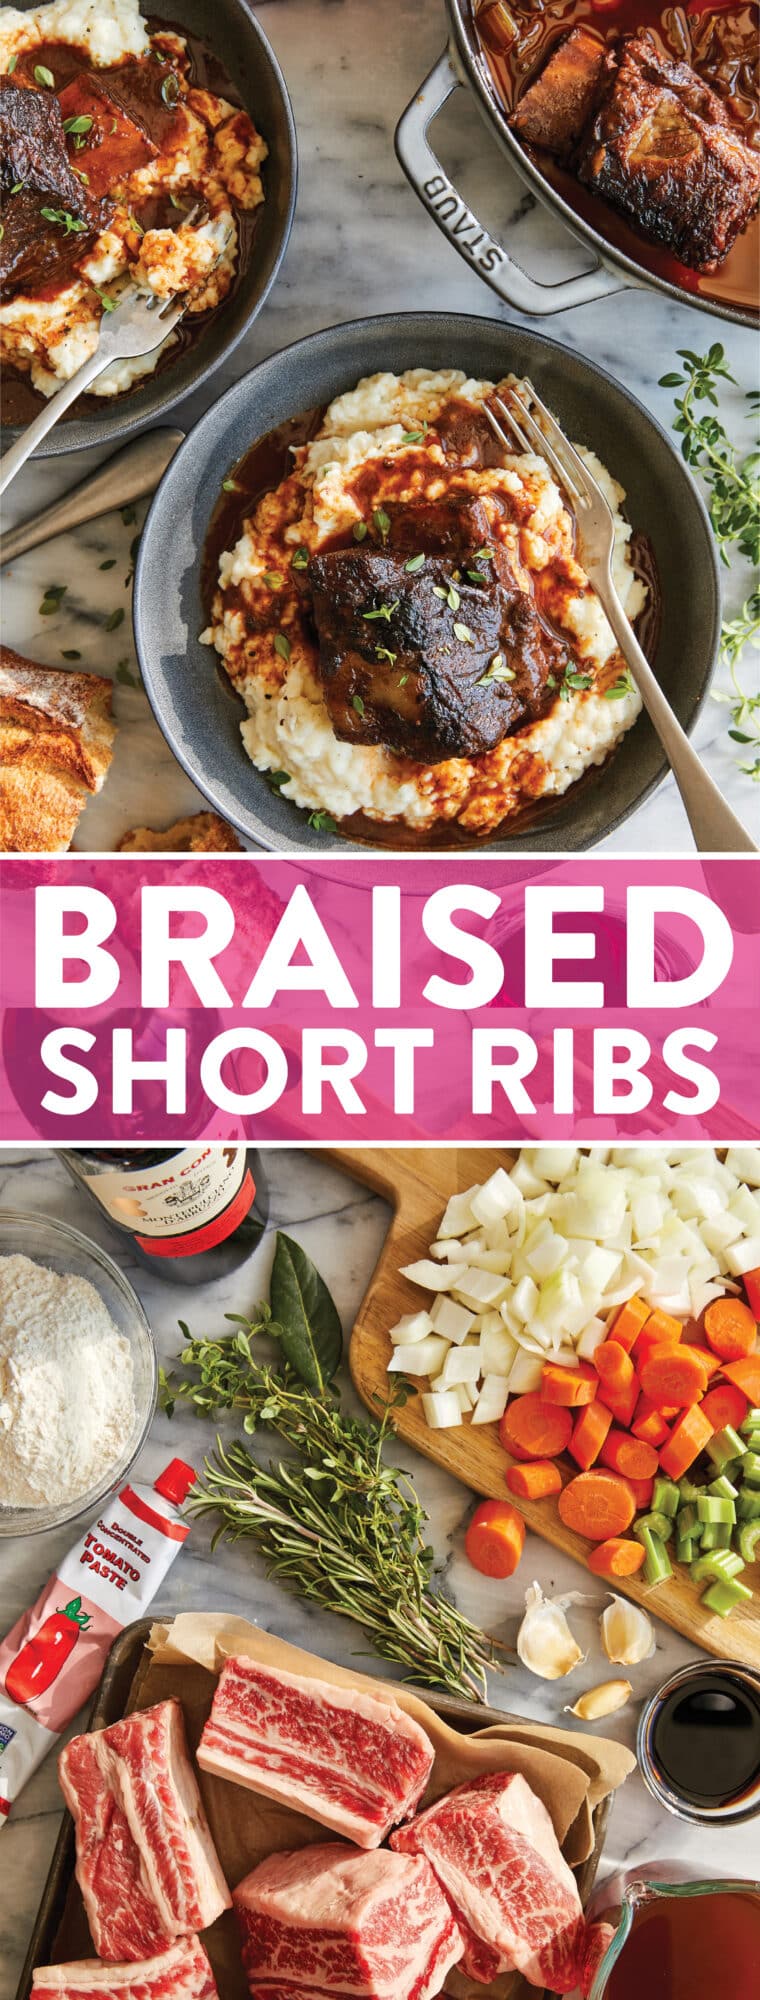 Braised Short Ribs - Best ever red wine braised short ribs. So tender, so fall-off-the-bone amazing. Serve over mashed potatoes - SO SO GOOD.